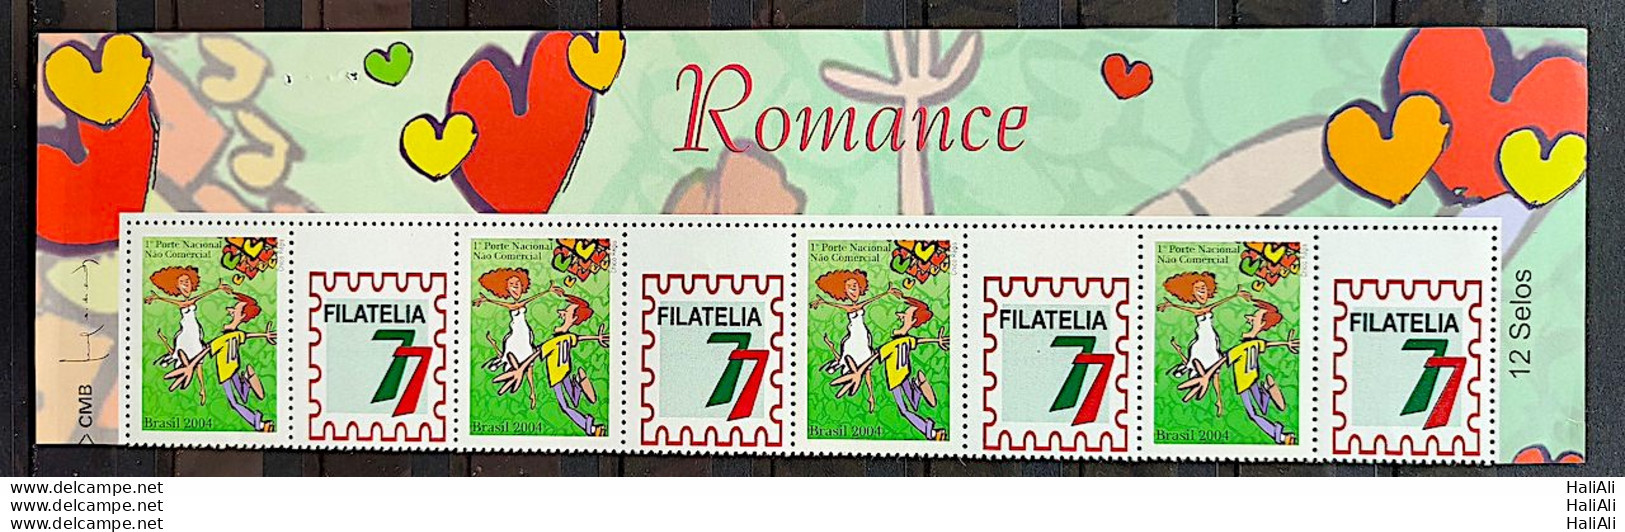 C 2558 Brazil Personalized Stamp Romance Hug 2004 3 With Vignette - Personalisiert